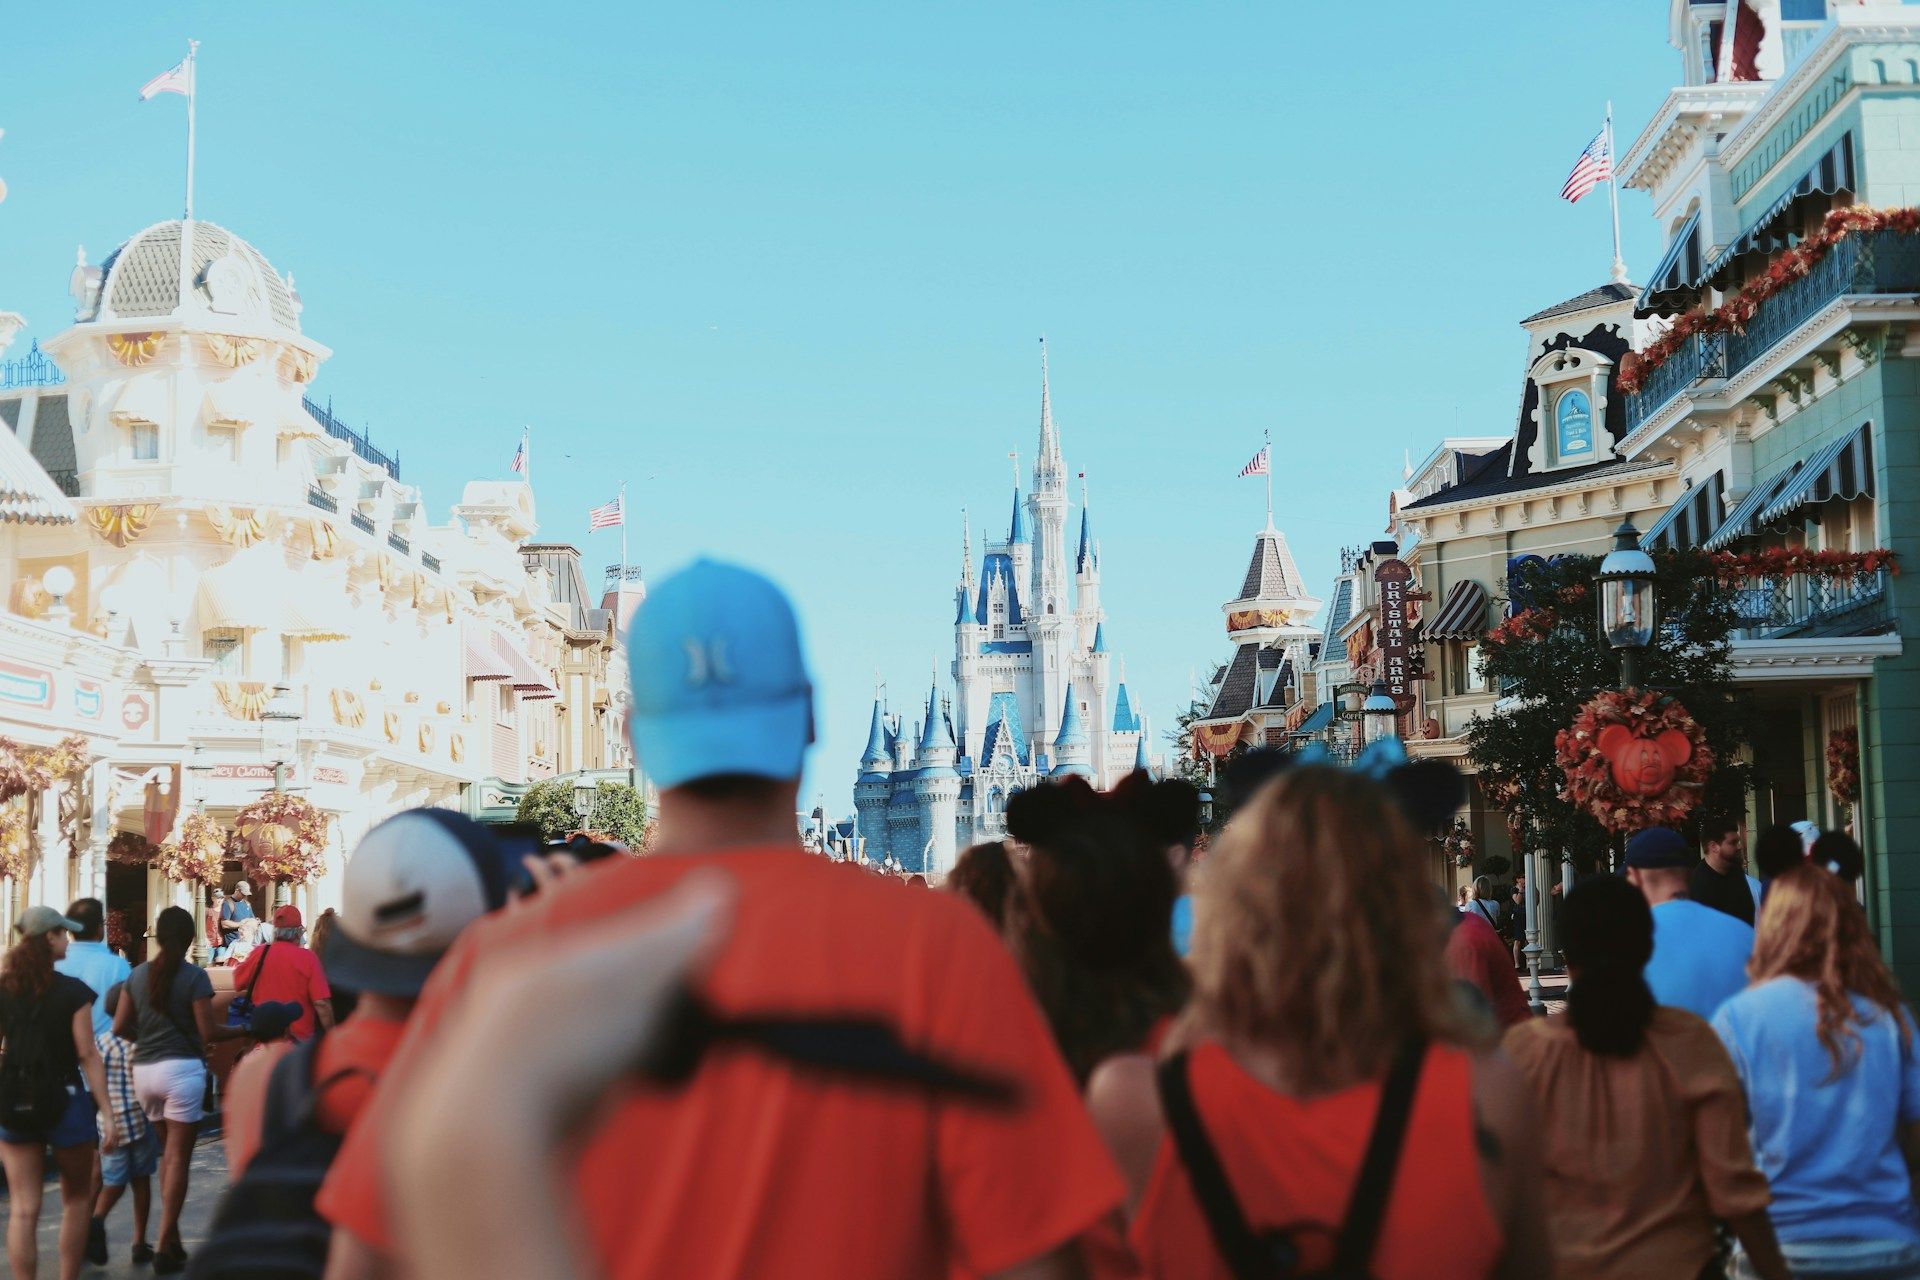 [Newsletter] Remote Workers Spark Trend Online By Working From Disney Parks​